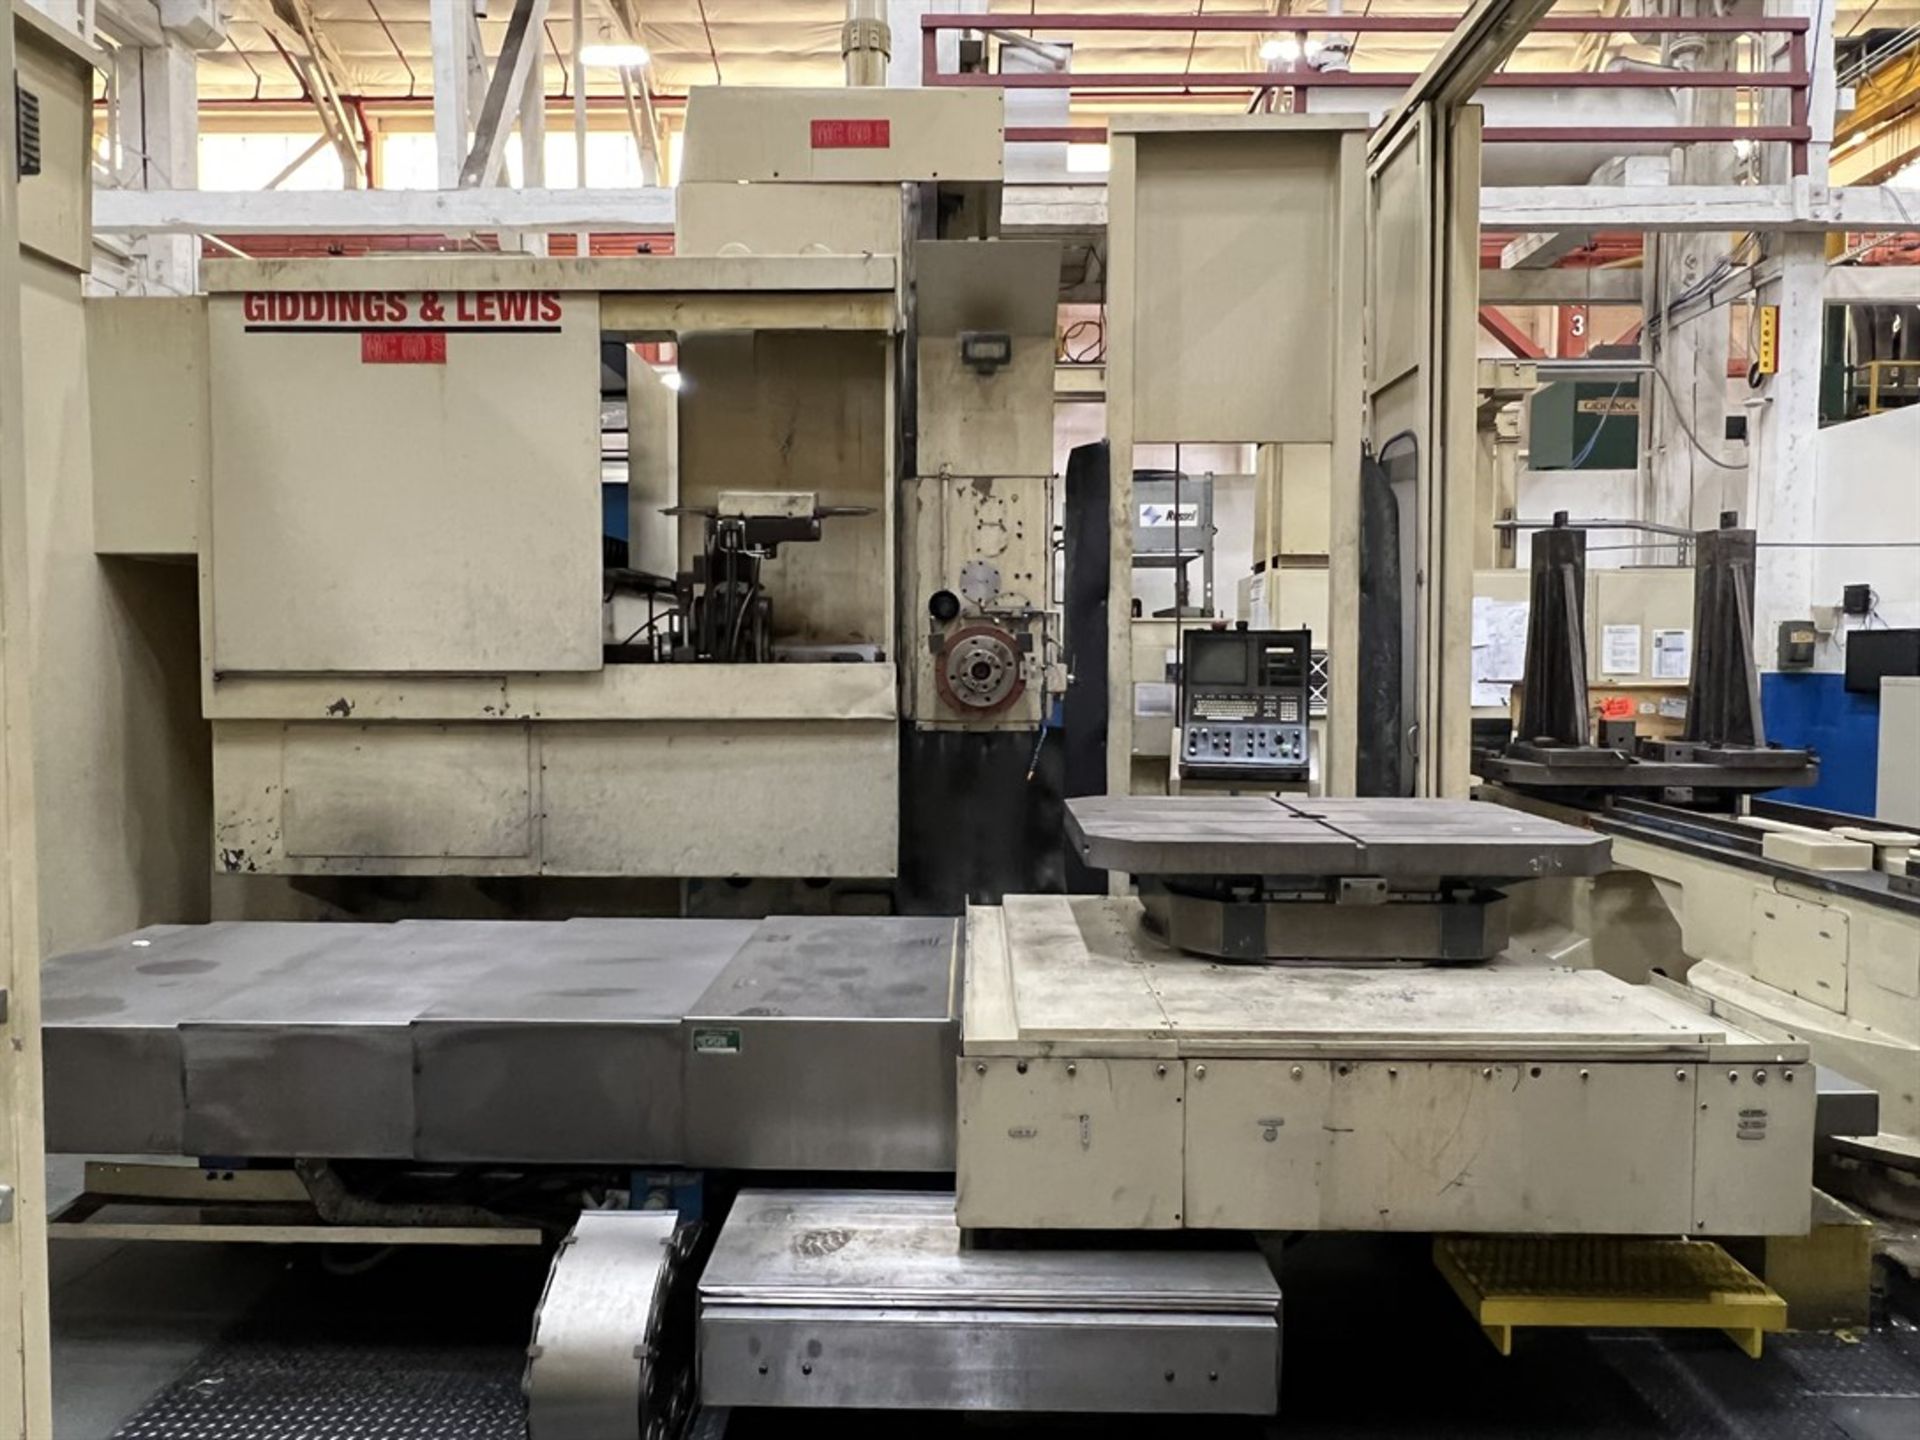 GIDDINGS & LEWIS MC-60 S Horizontal Machining Center, s/n 450-172-86, G & L 8000 Control, 6” Spindle - Image 3 of 13